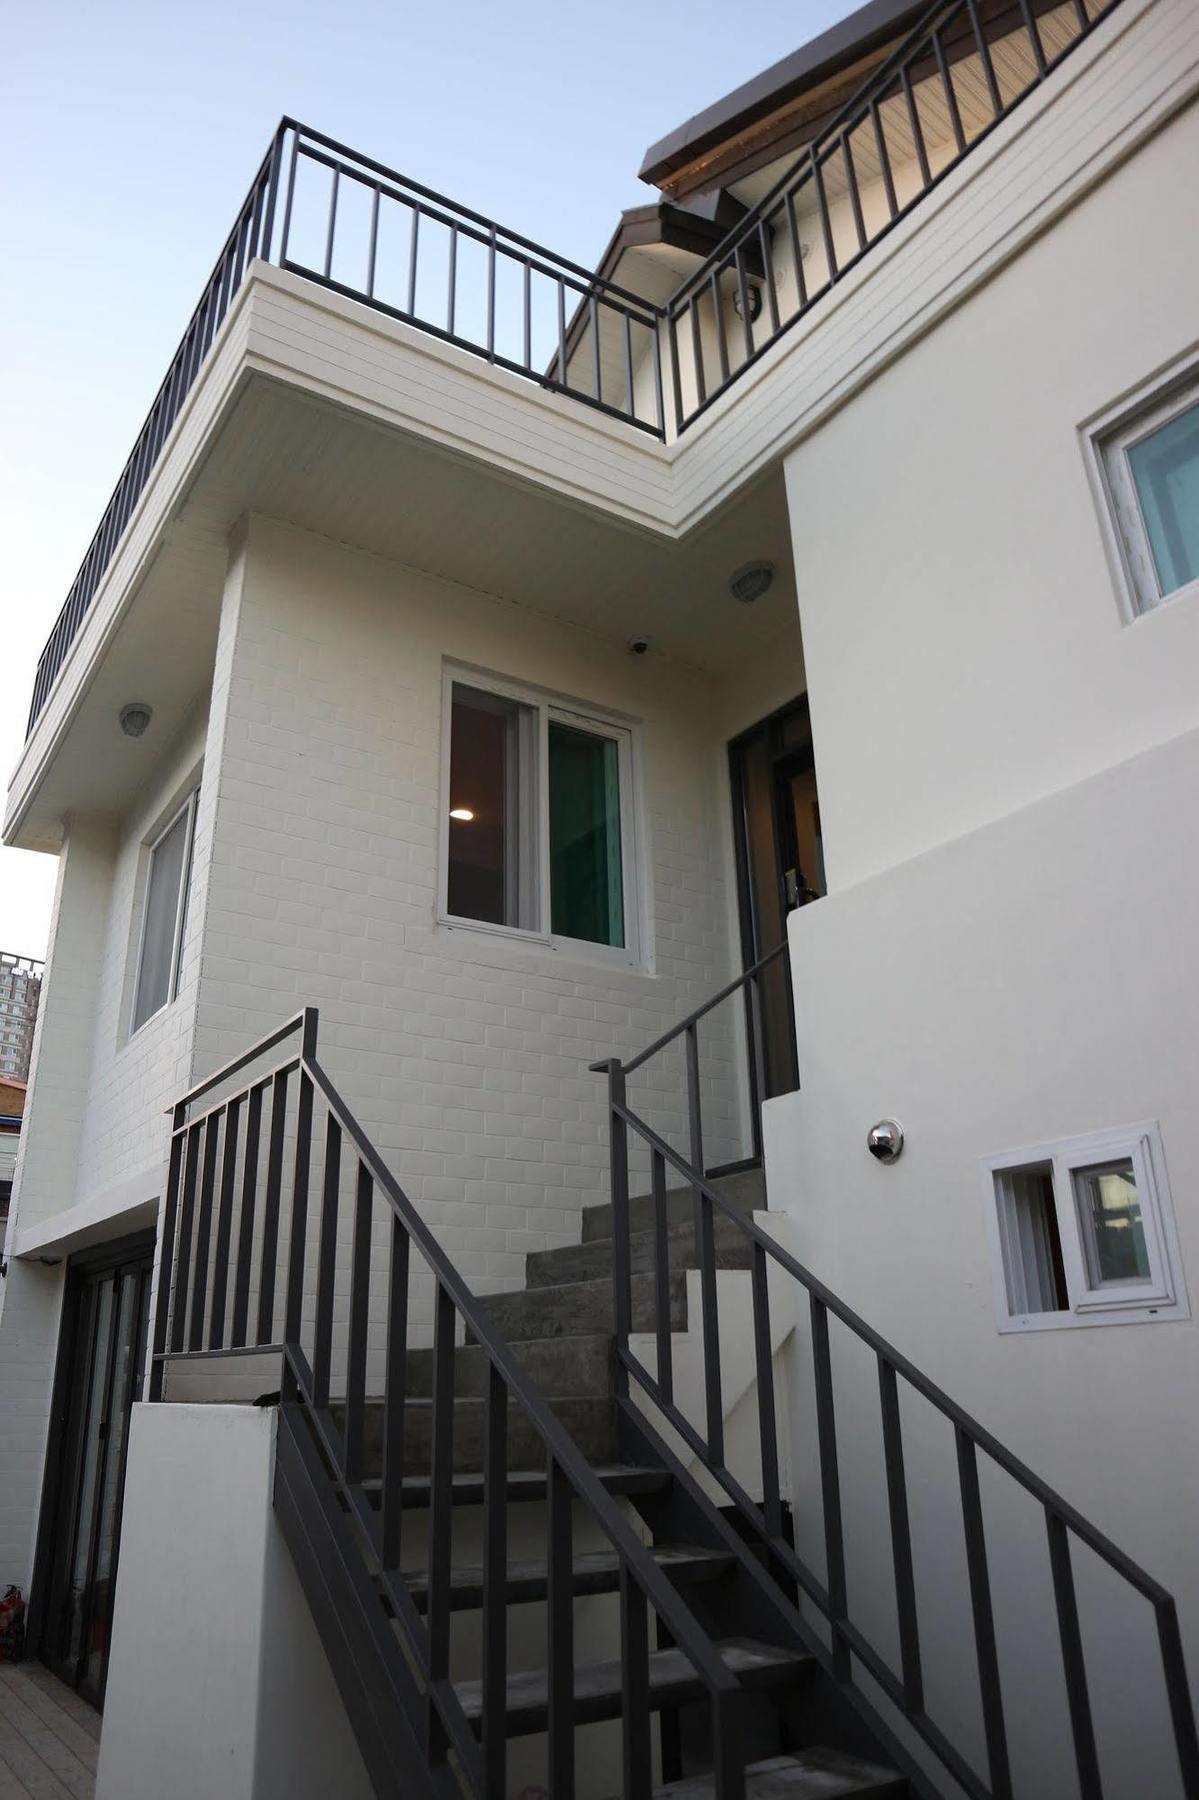 Zzzip Guesthouse In Hongdae Seoul Exterior photo